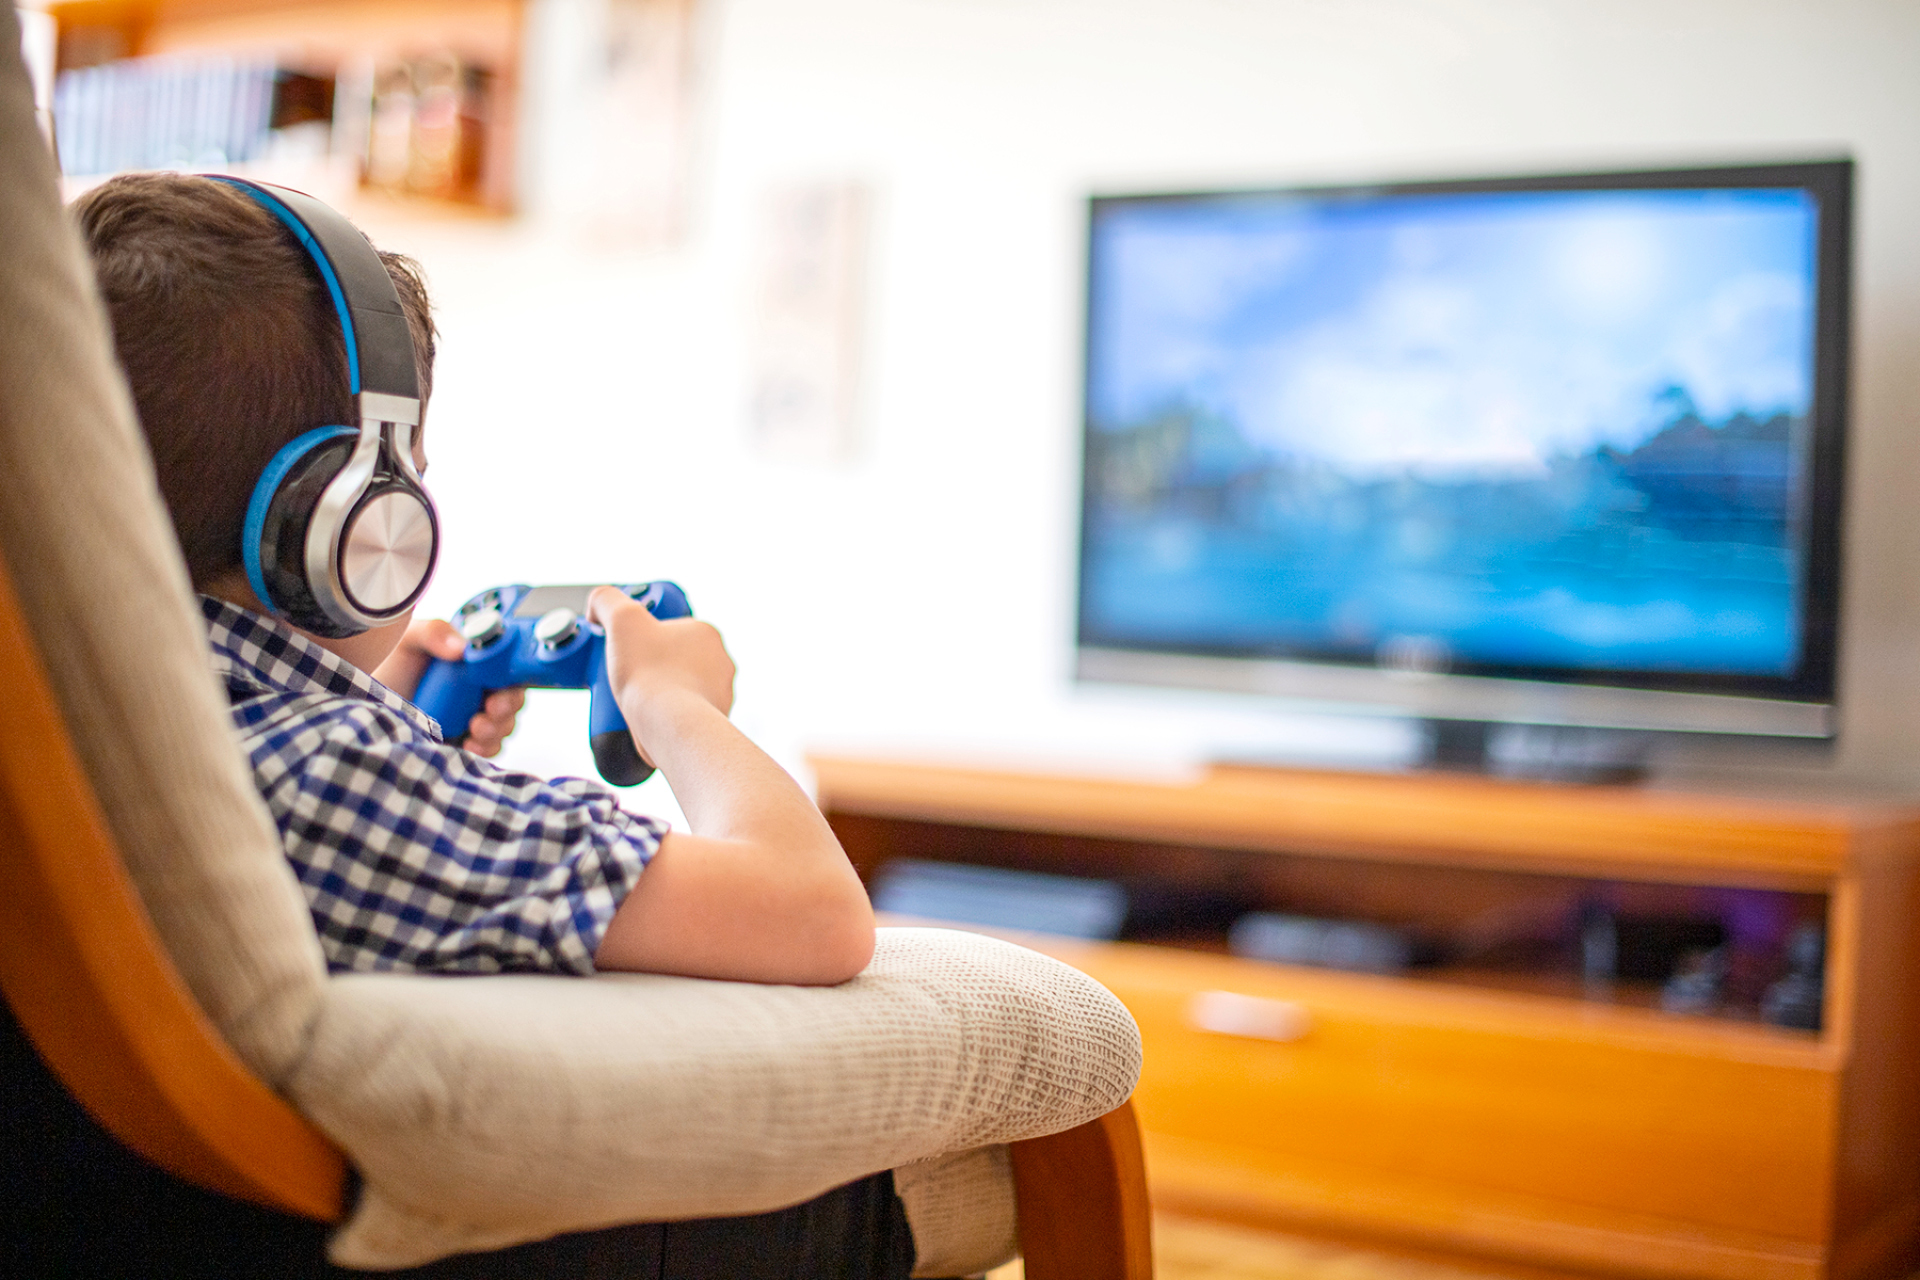 A Quarter Of Kids Playing Online Games With Strangers